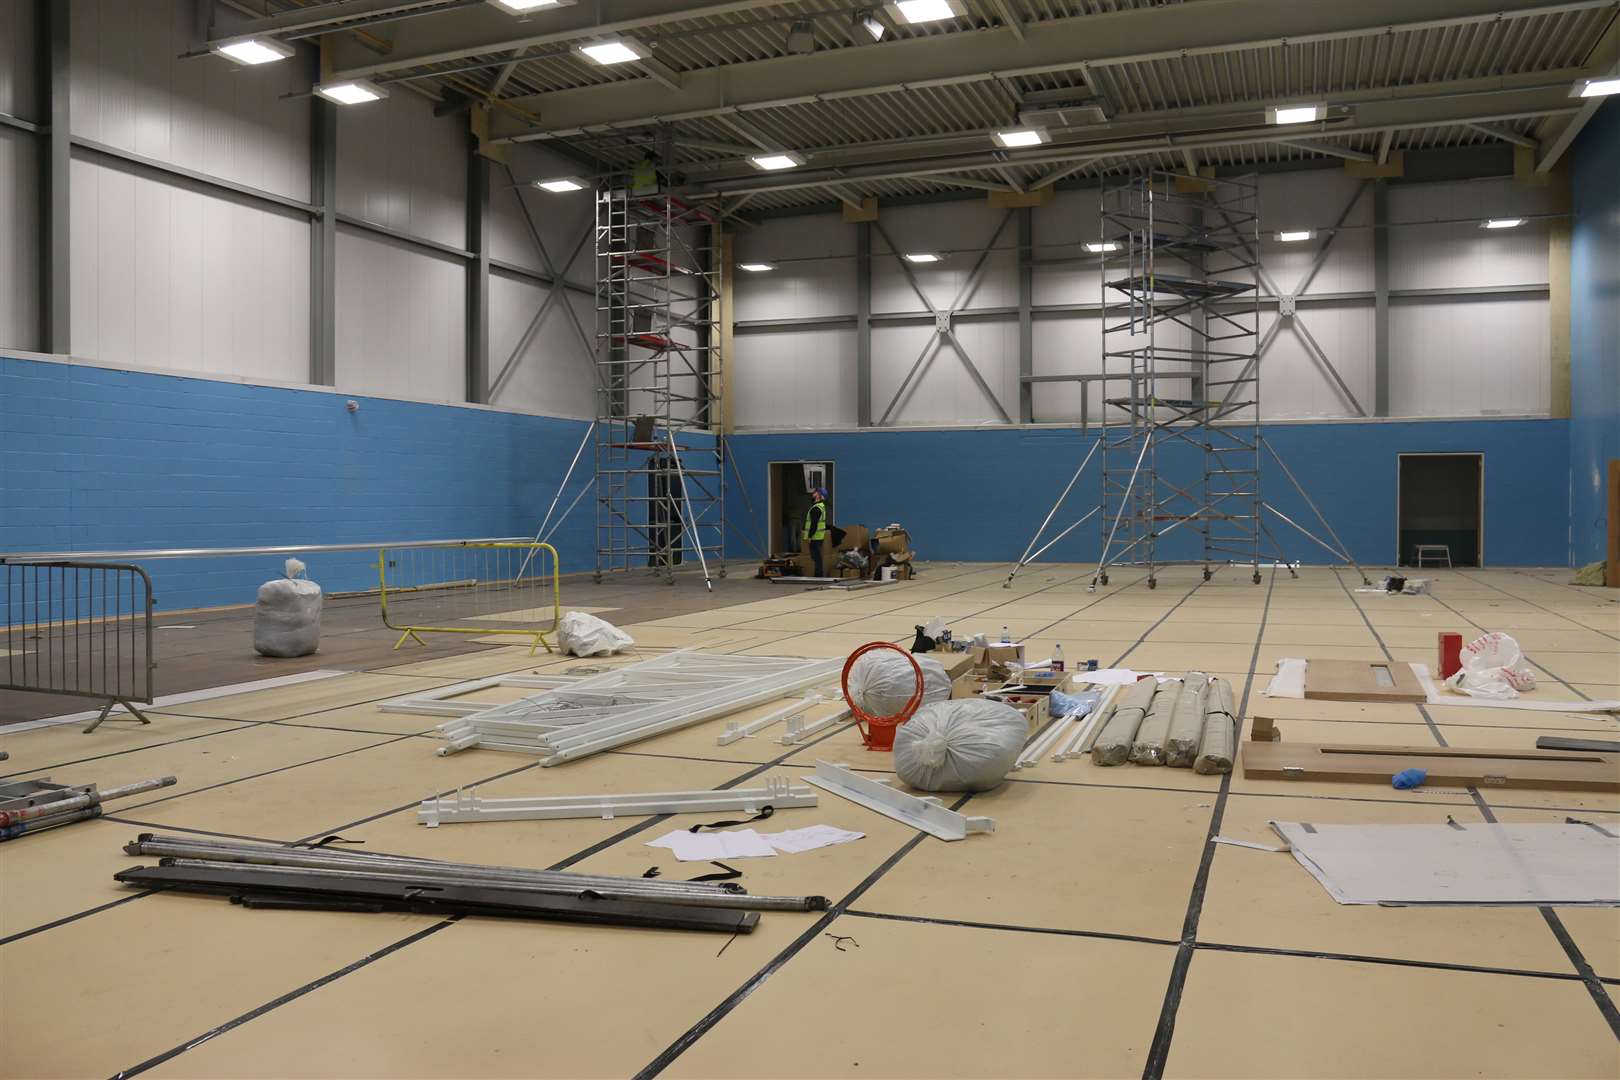 Members will have a brand new sports hall to use.